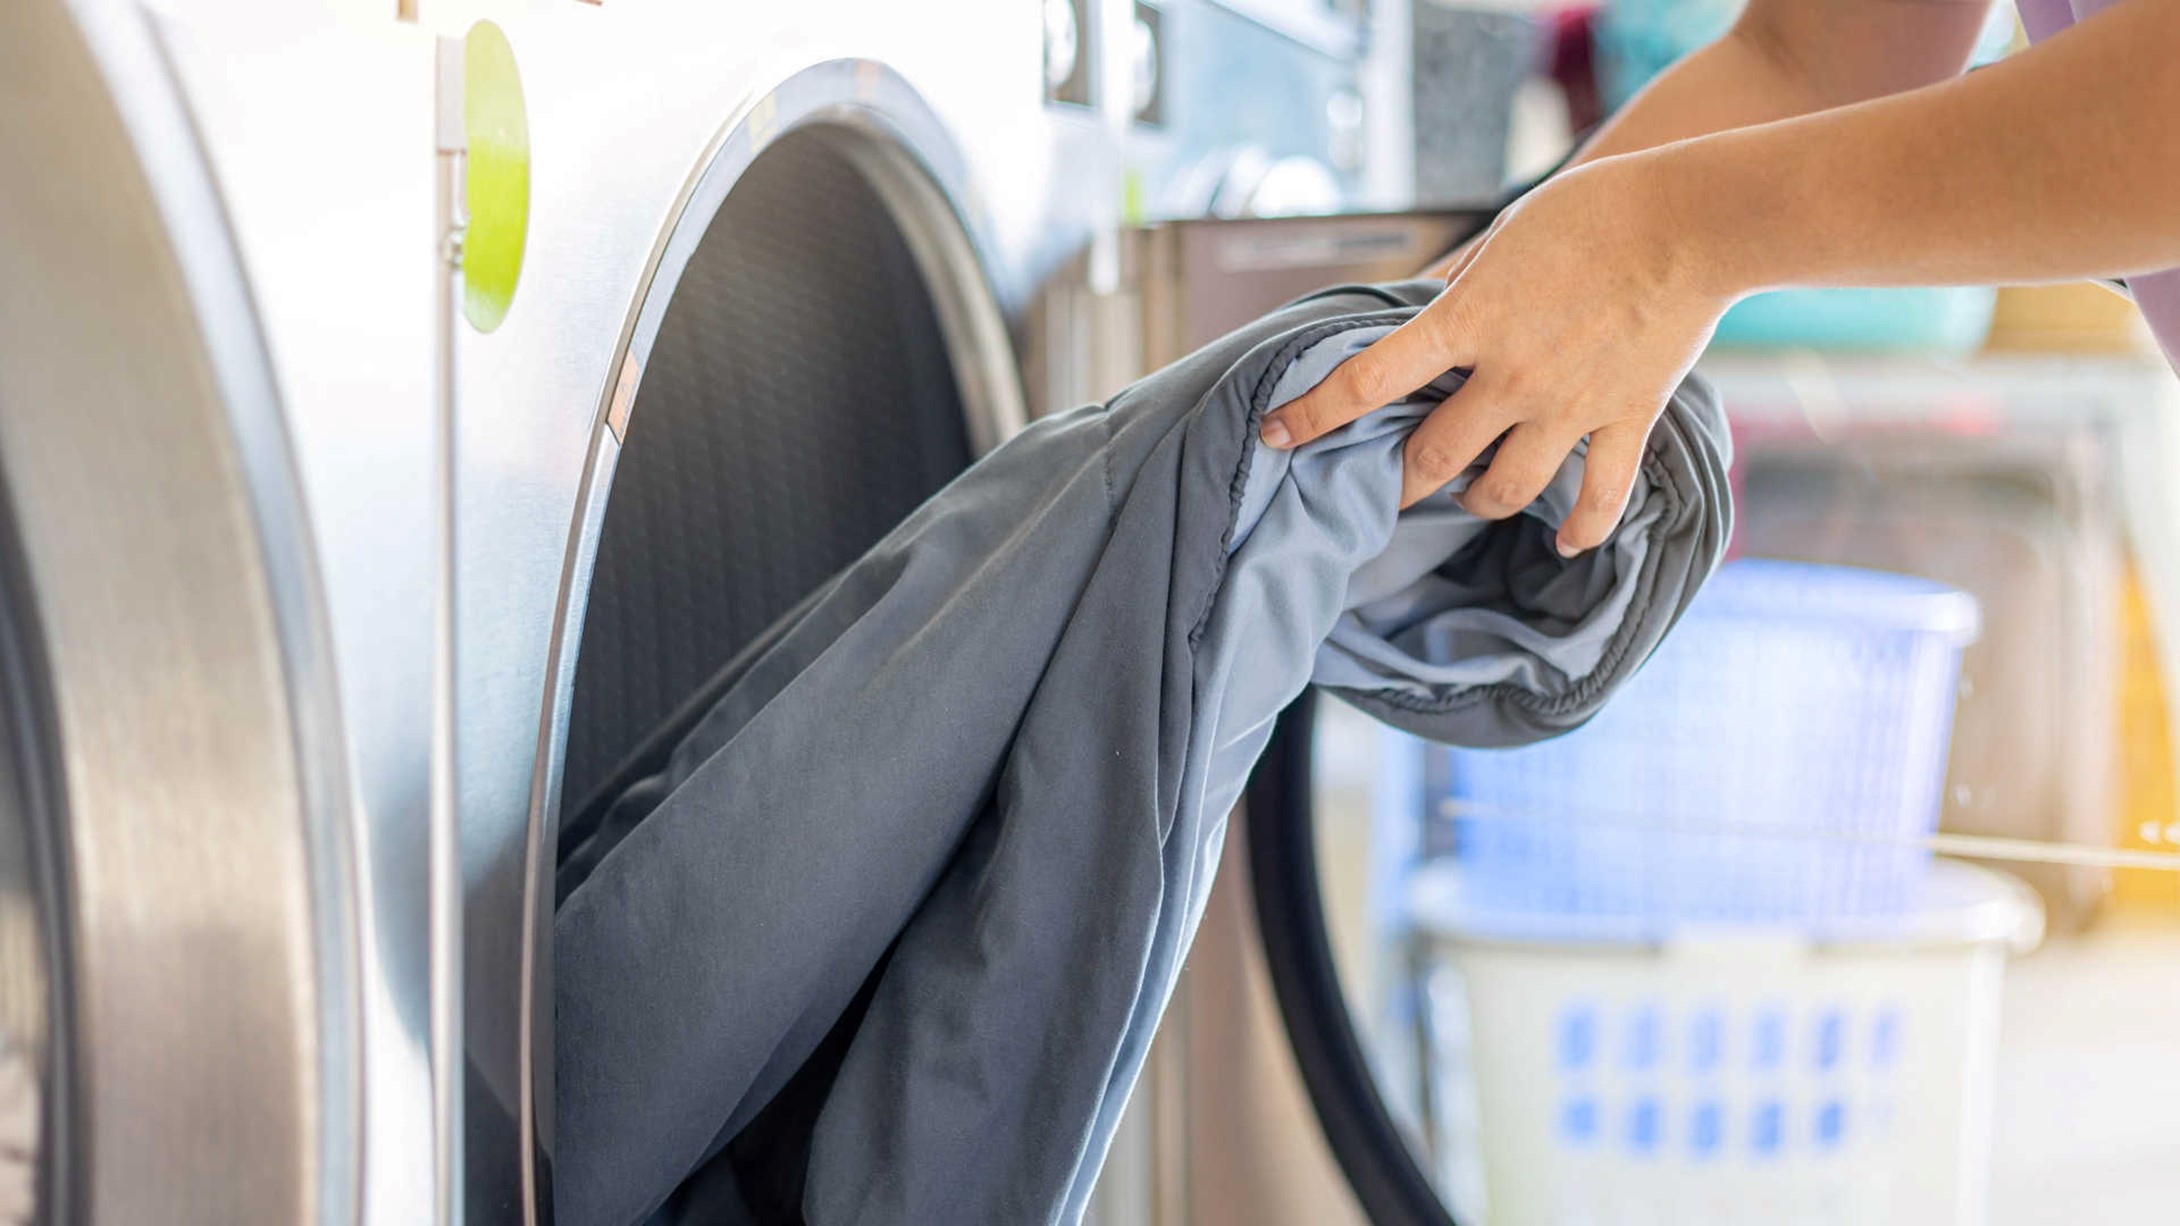 Laundromat myths – woman taking clothes out of commercial washing machine